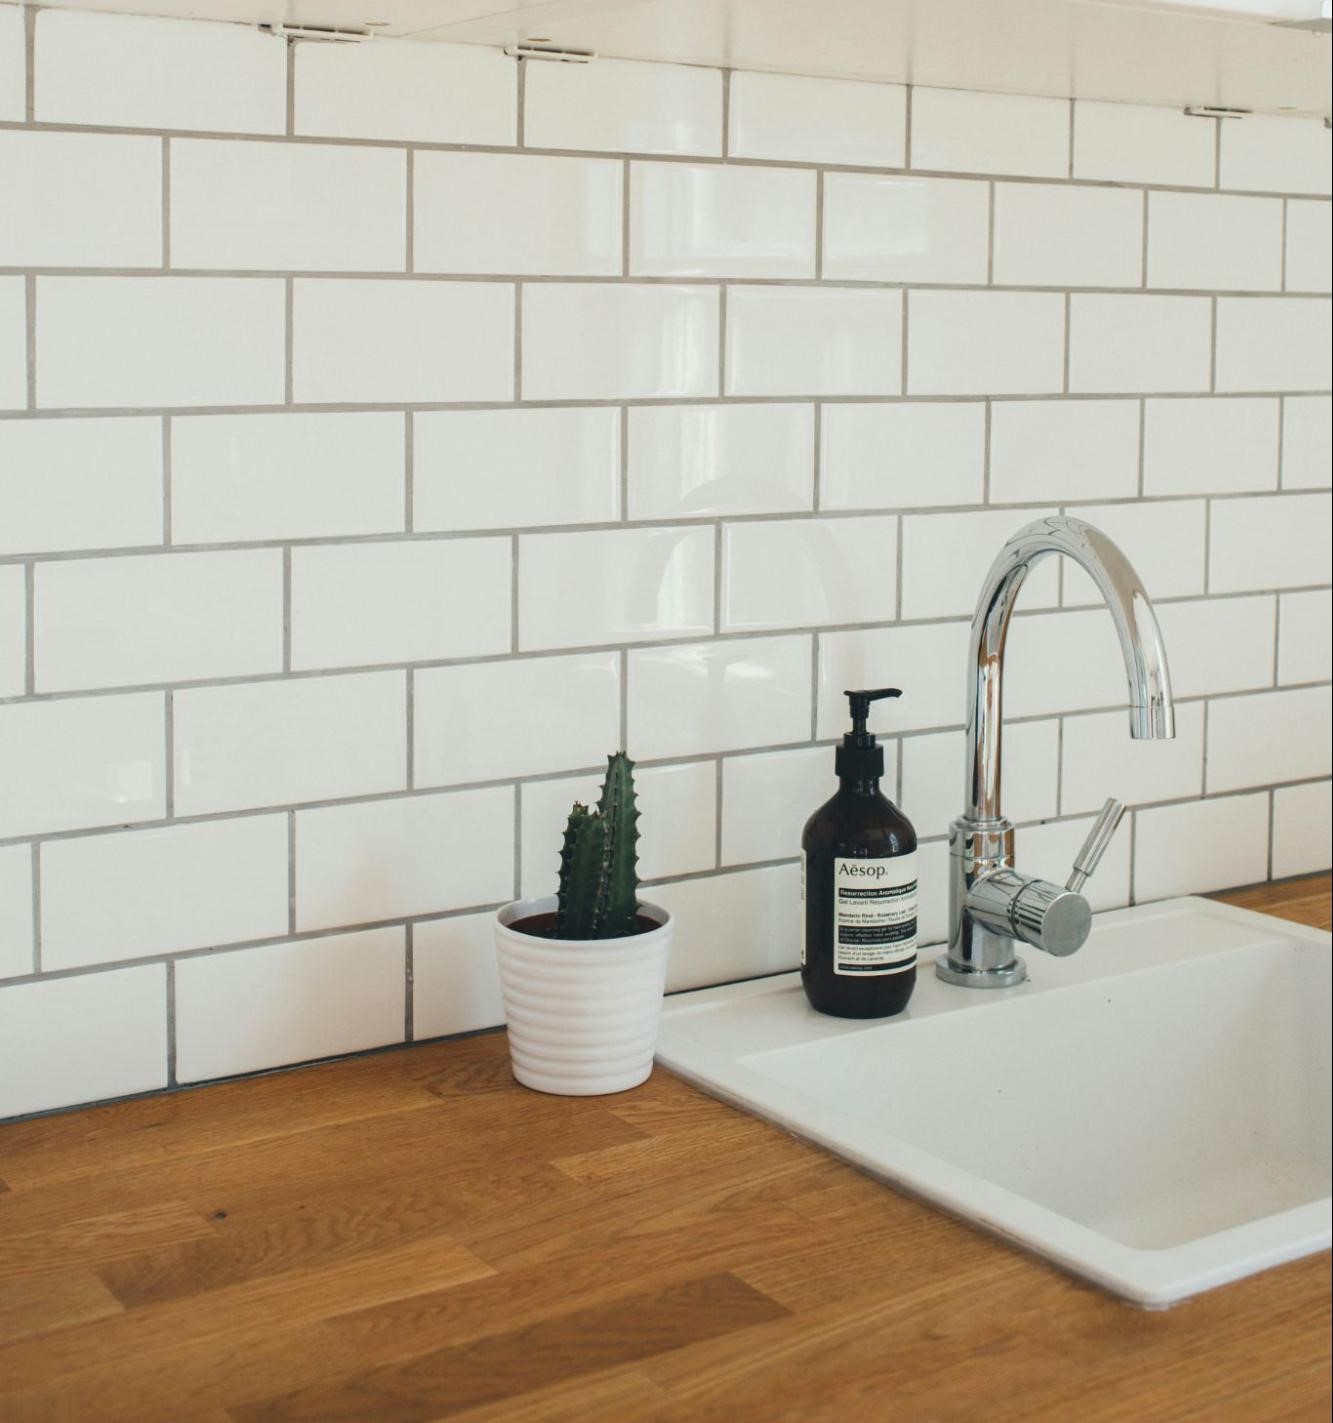 white grouted tiles in kitchen